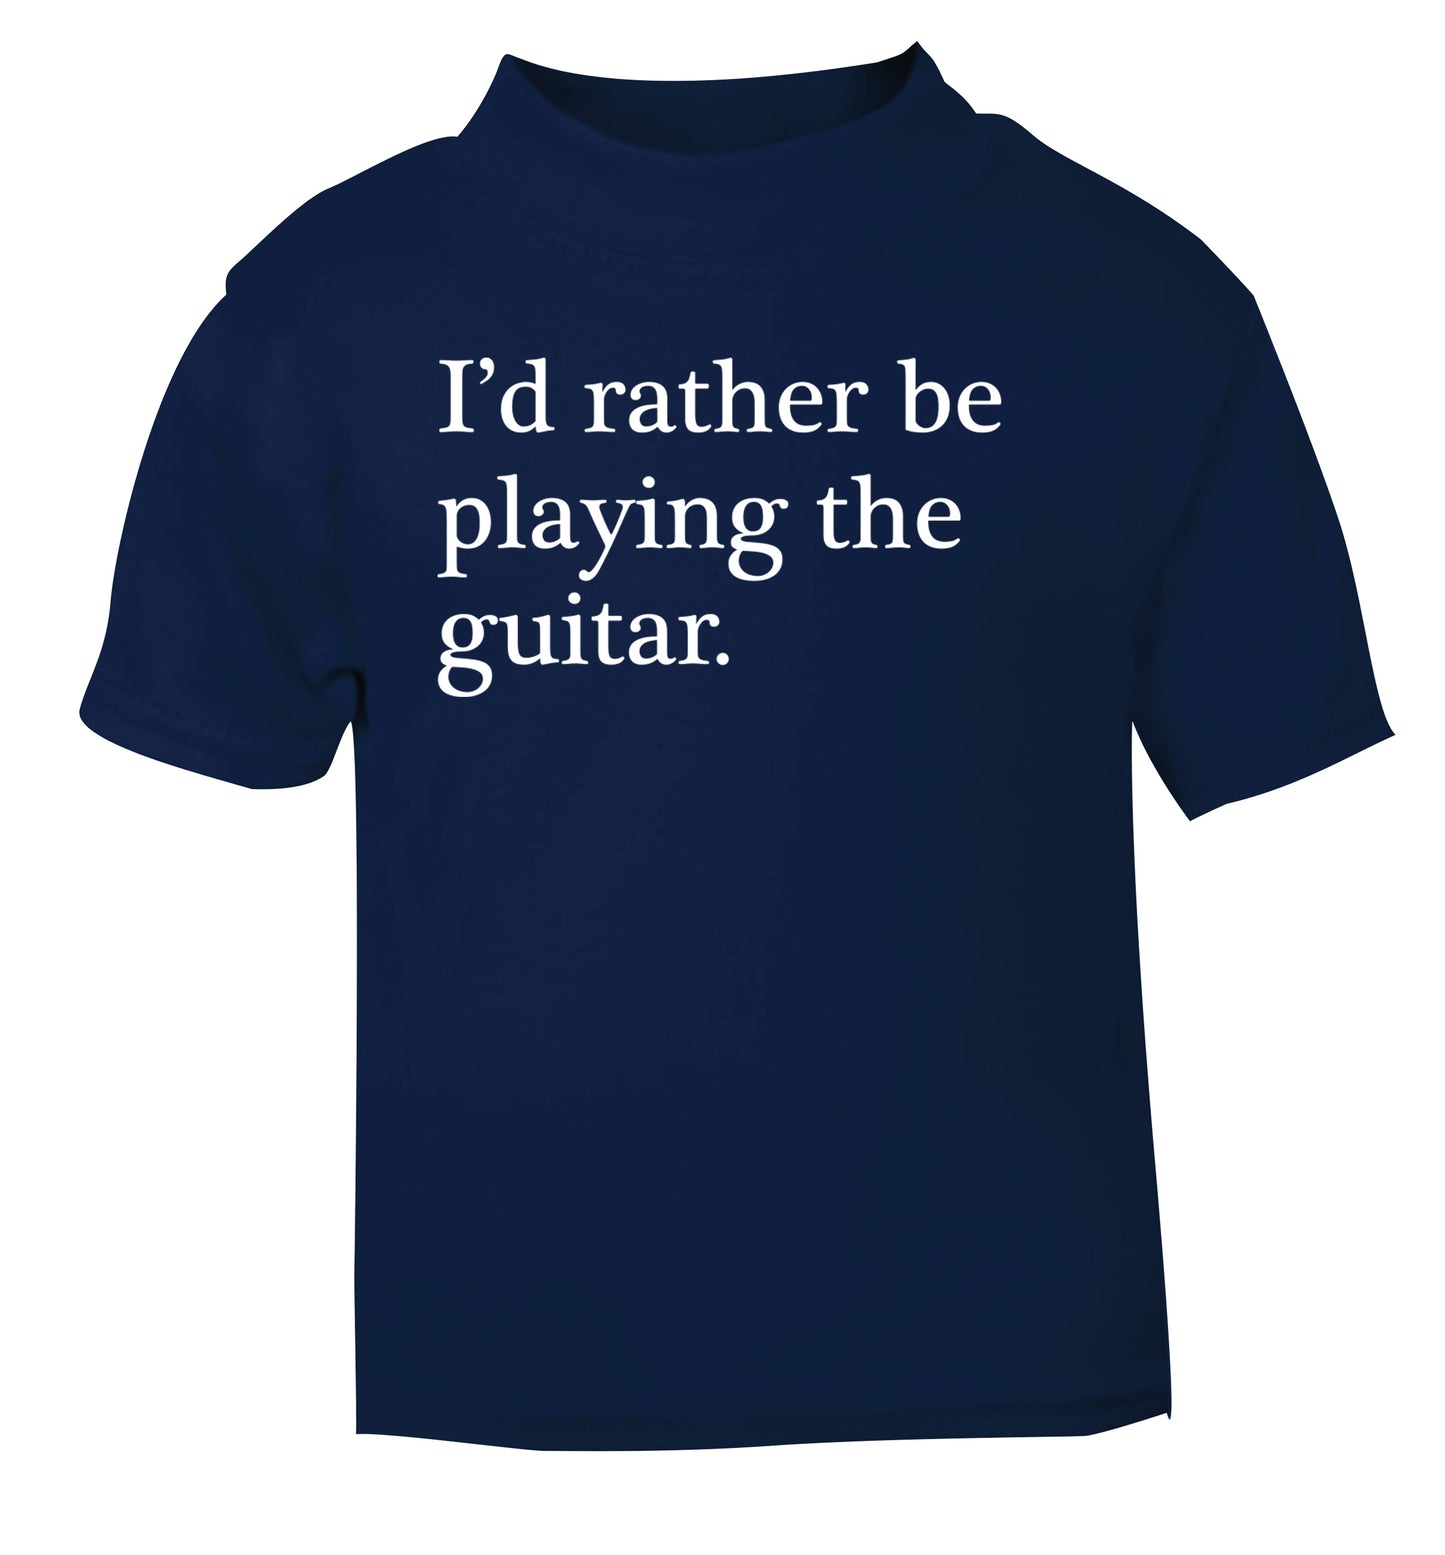 I'd rather be playing the guitar navy Baby Toddler Tshirt 2 Years